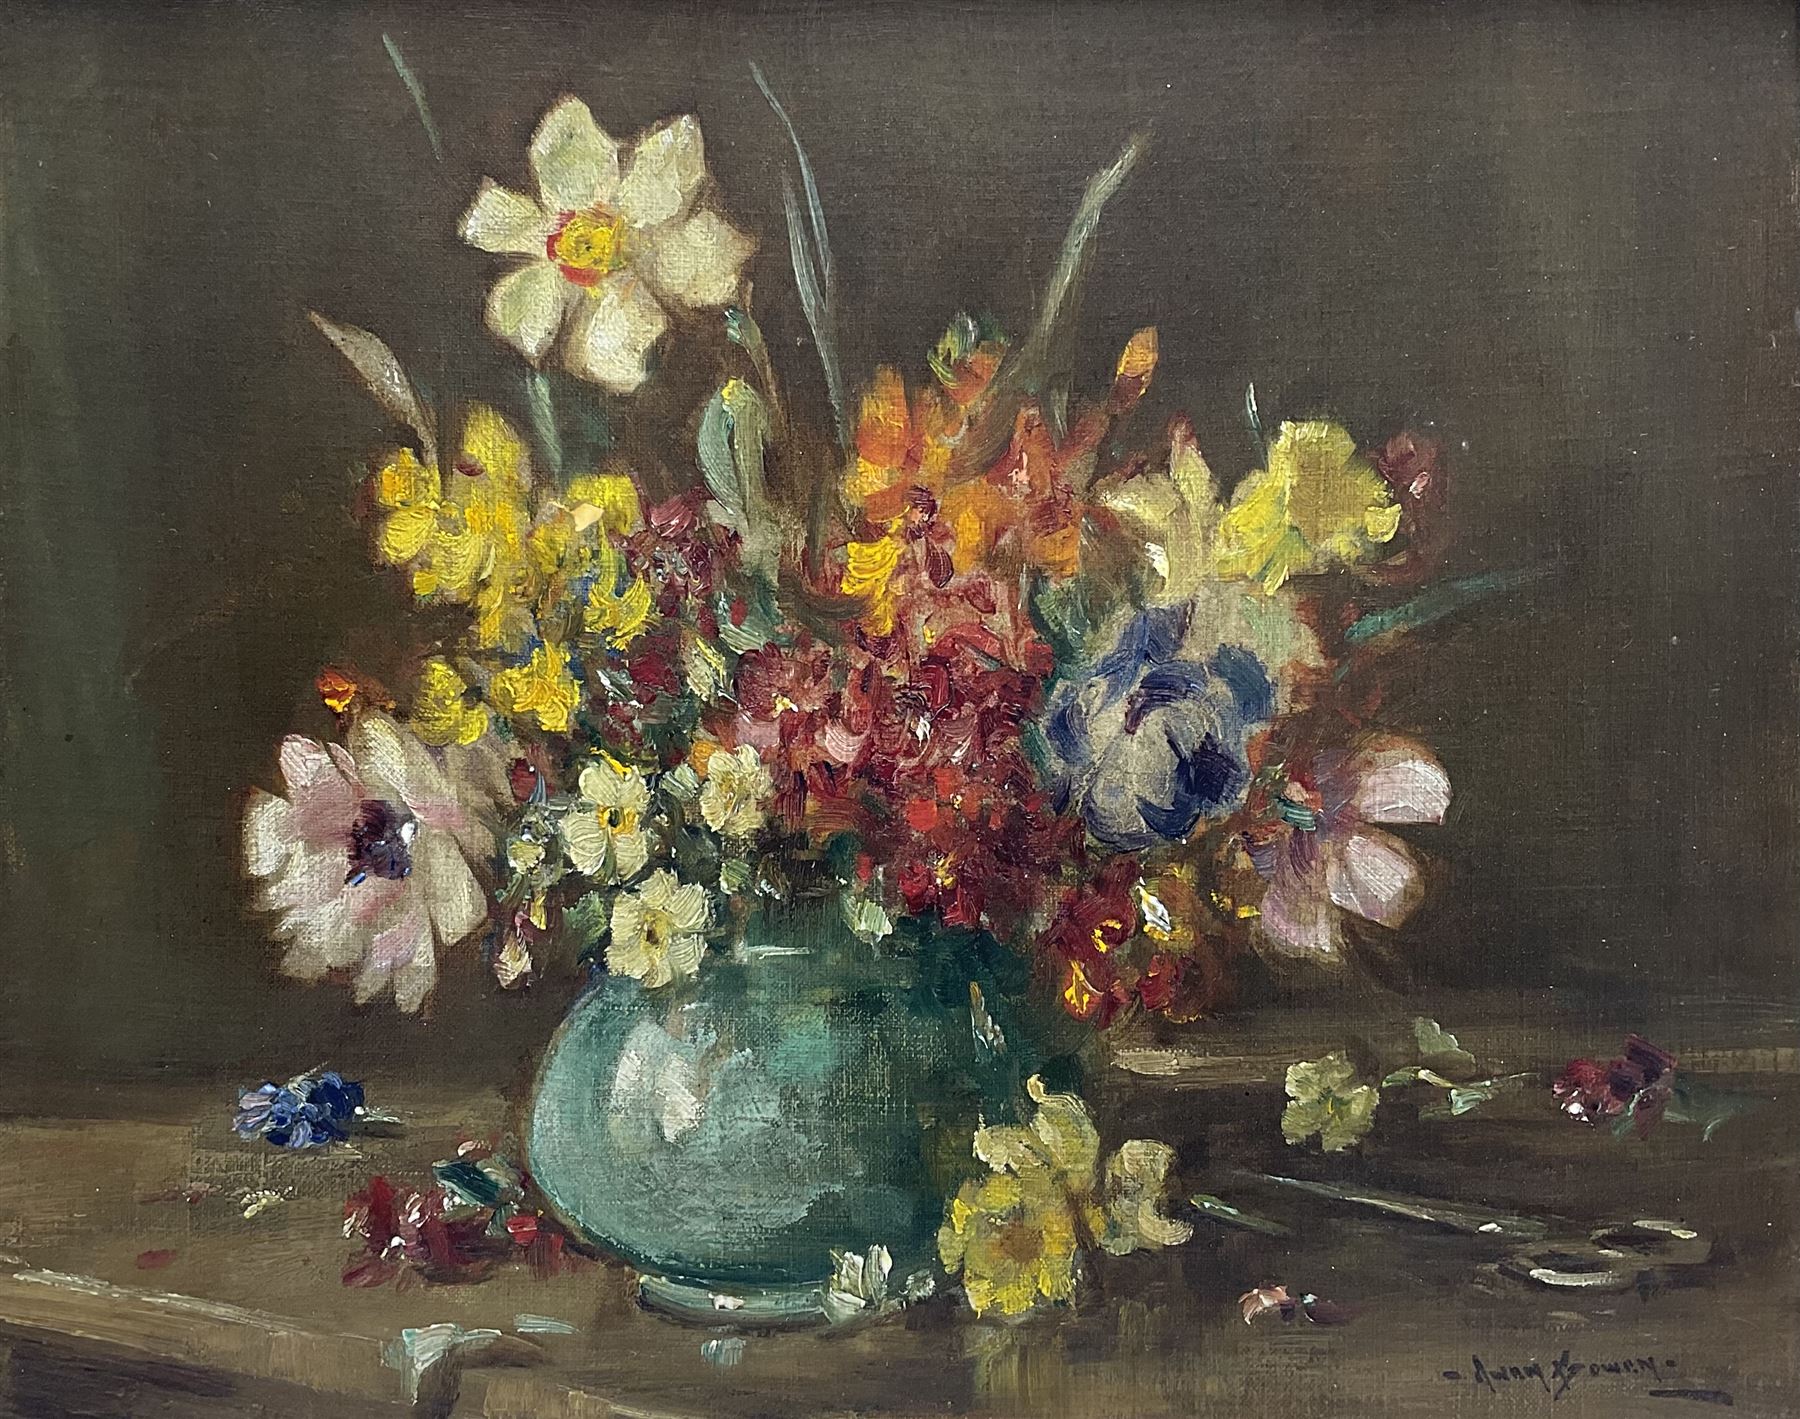 Owen Bowen (Staithes Group 1873-1967): Still Life of Spring Flowers in a Vase